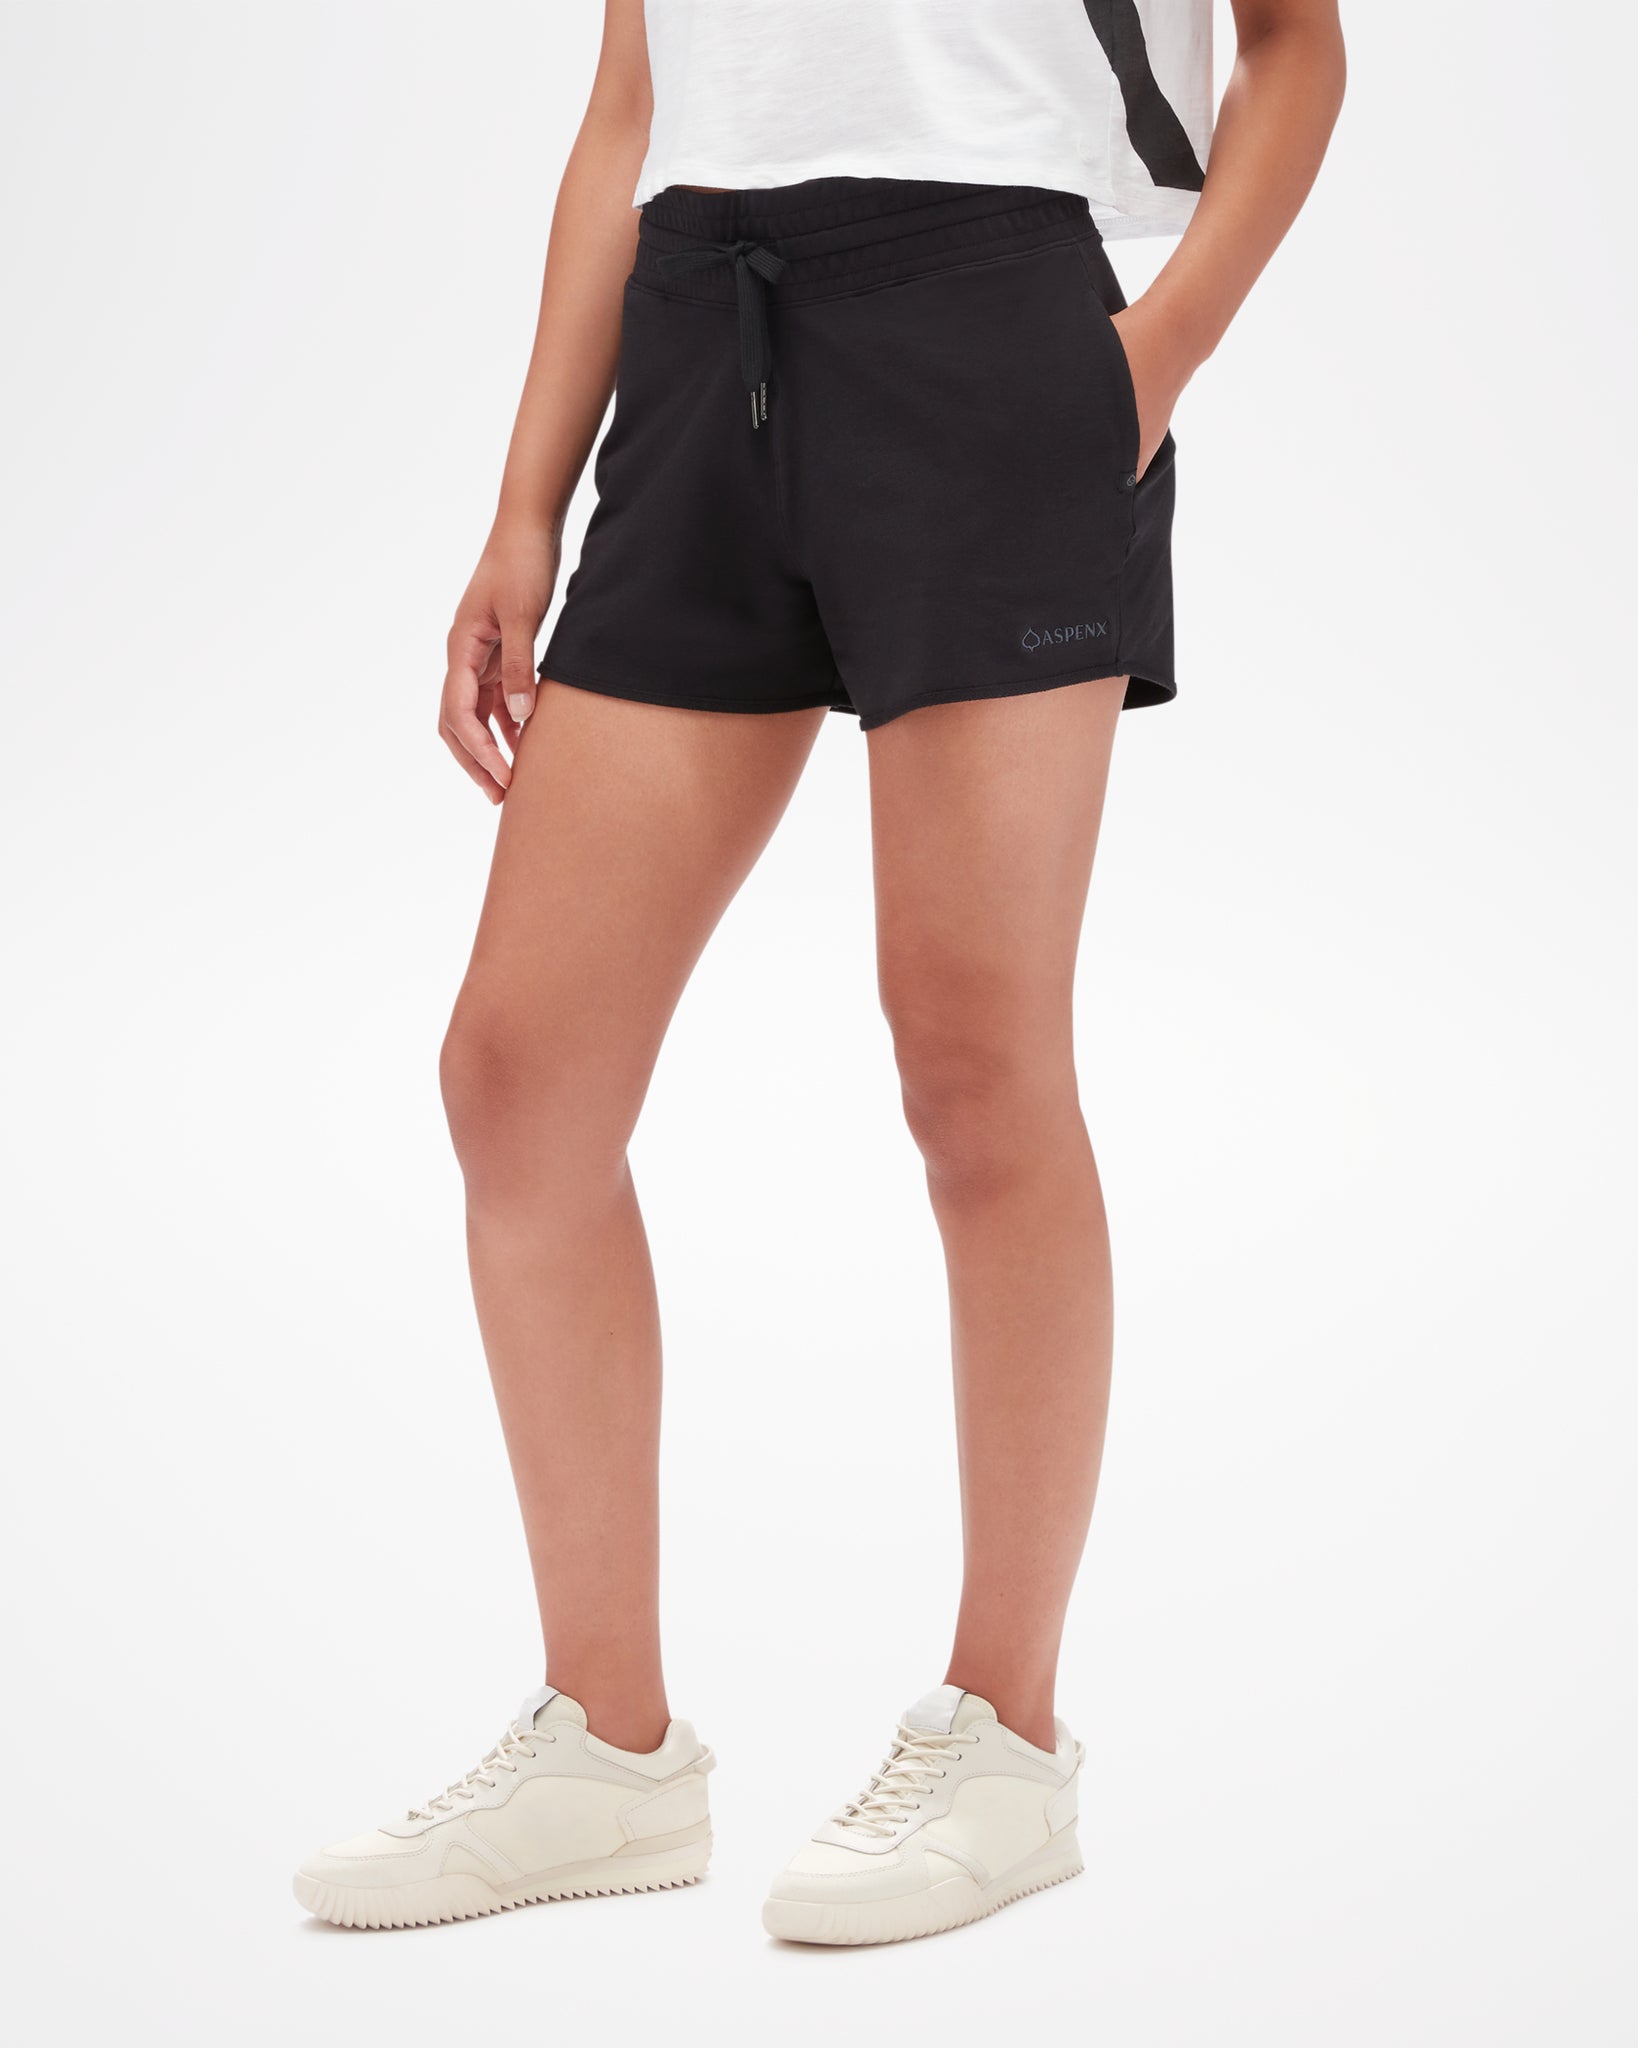 All in Motion Women's French Terry Shorts 3.5 BLACK Size 2XL